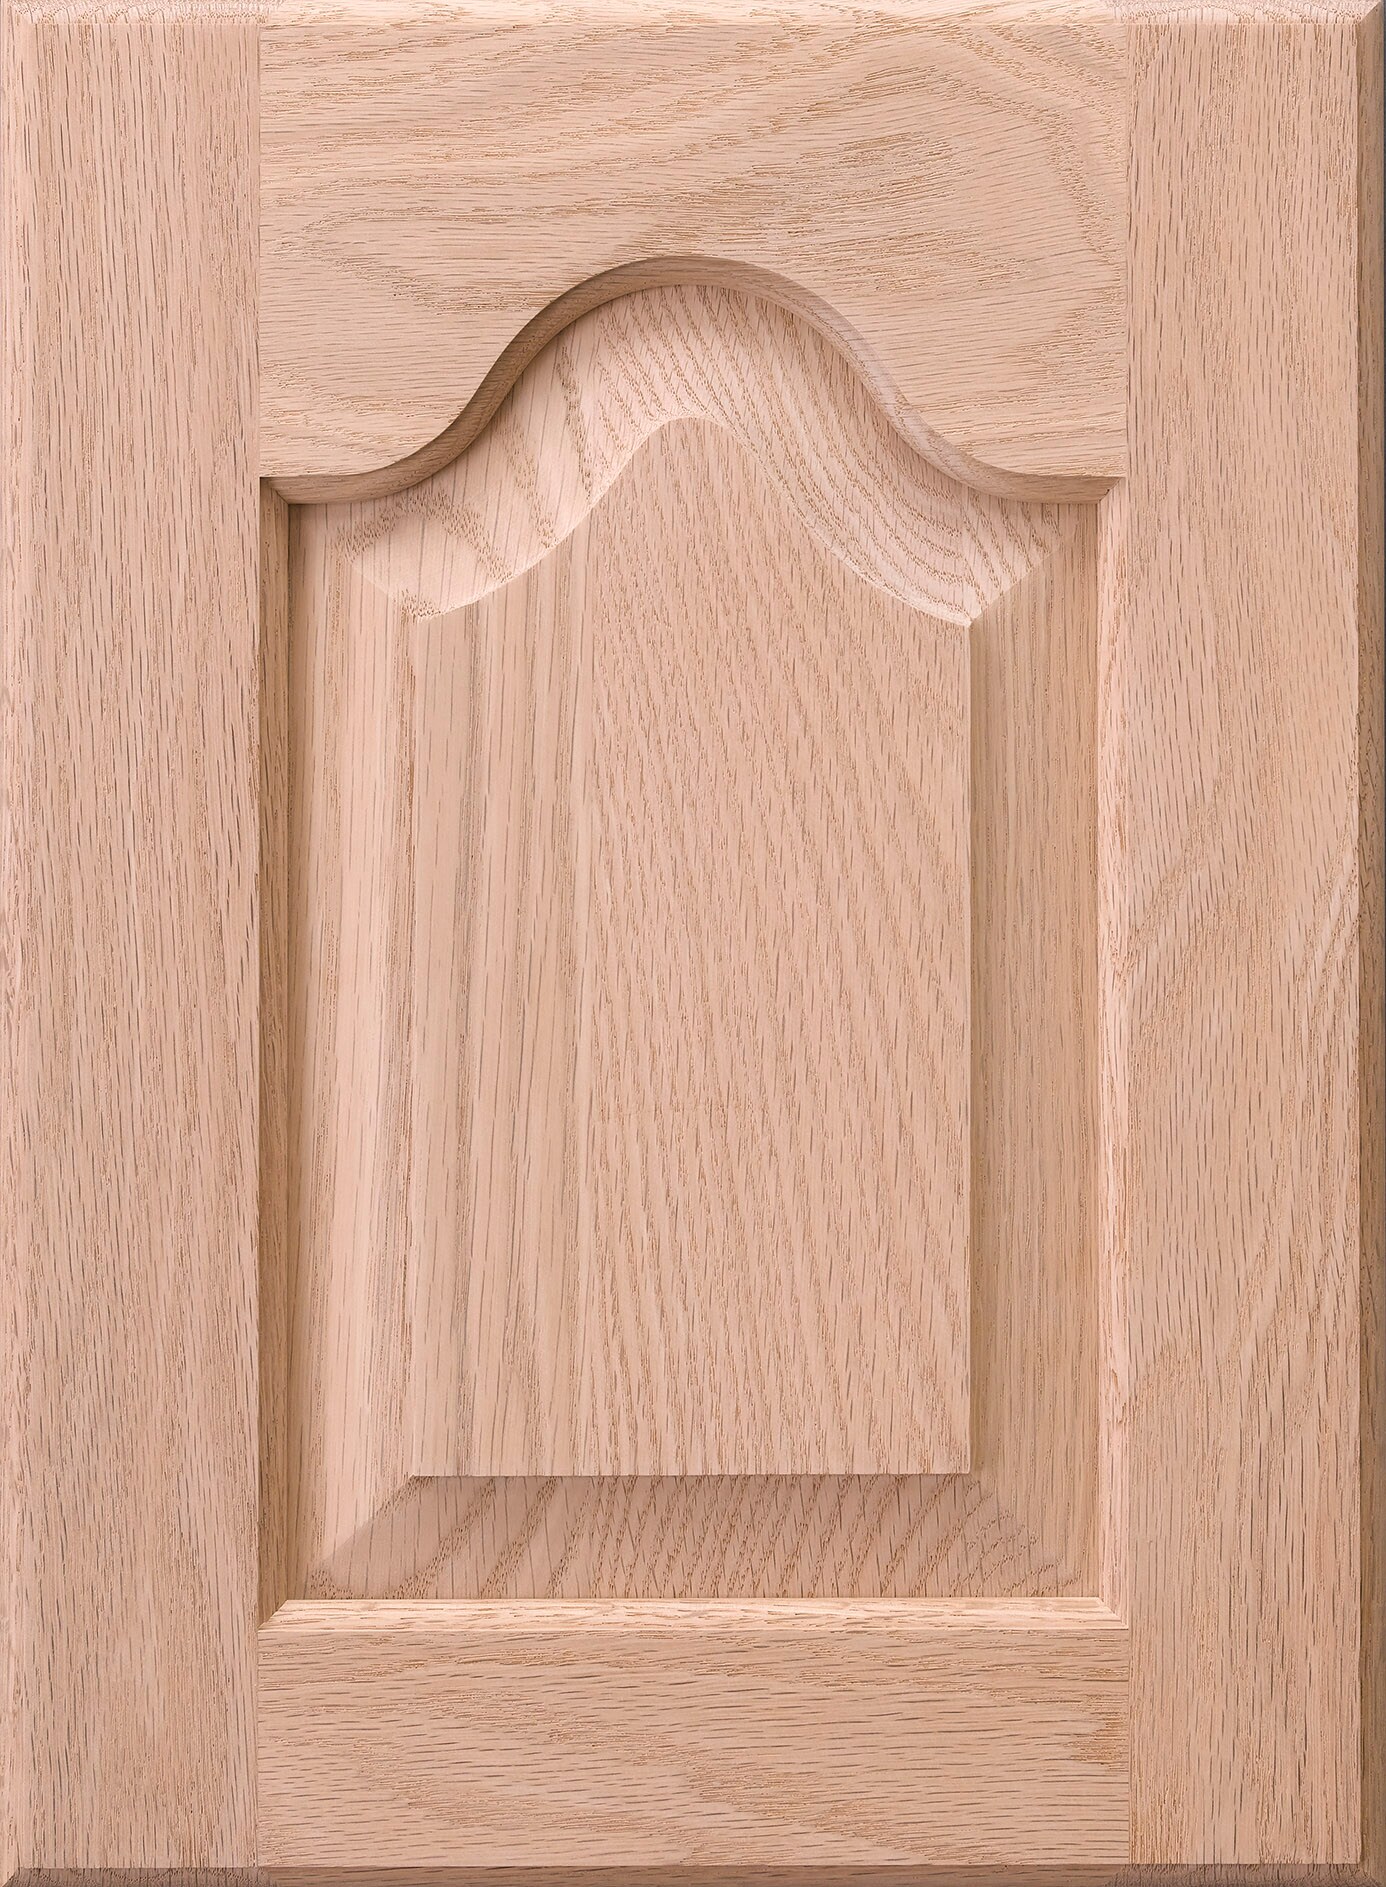 Unfinished Oak Cabinet Door Square with Raised Panel by Kendor 20H x 19W